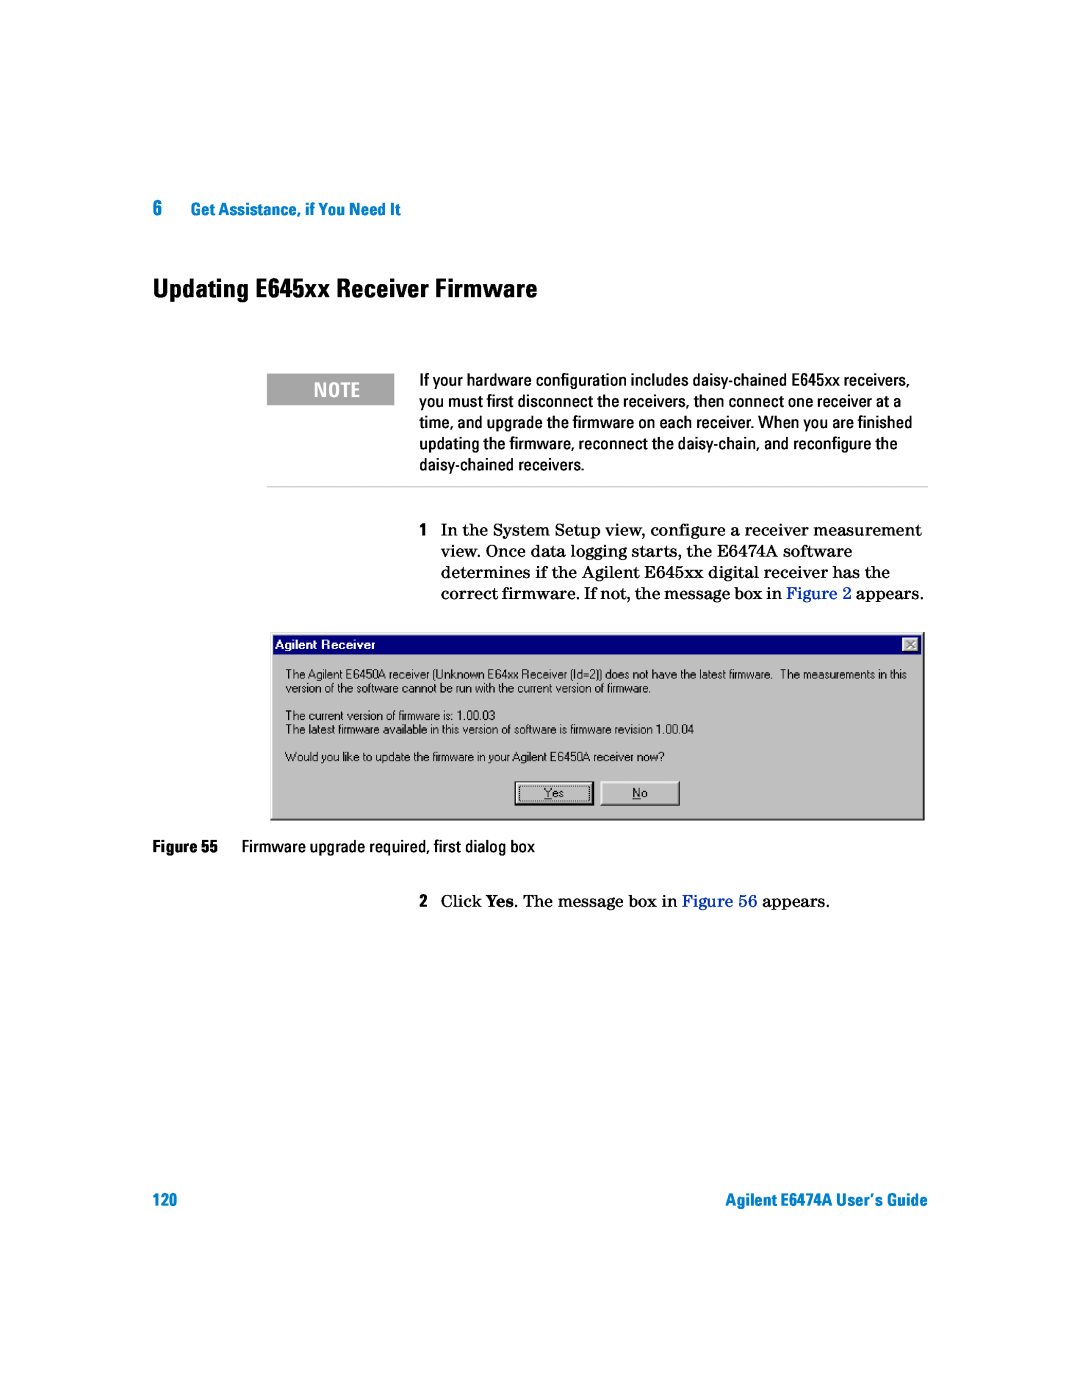 Agilent Technologies Agilent E6474A manual Updating E645xx Receiver Firmware, Get Assistance, if You Need It 